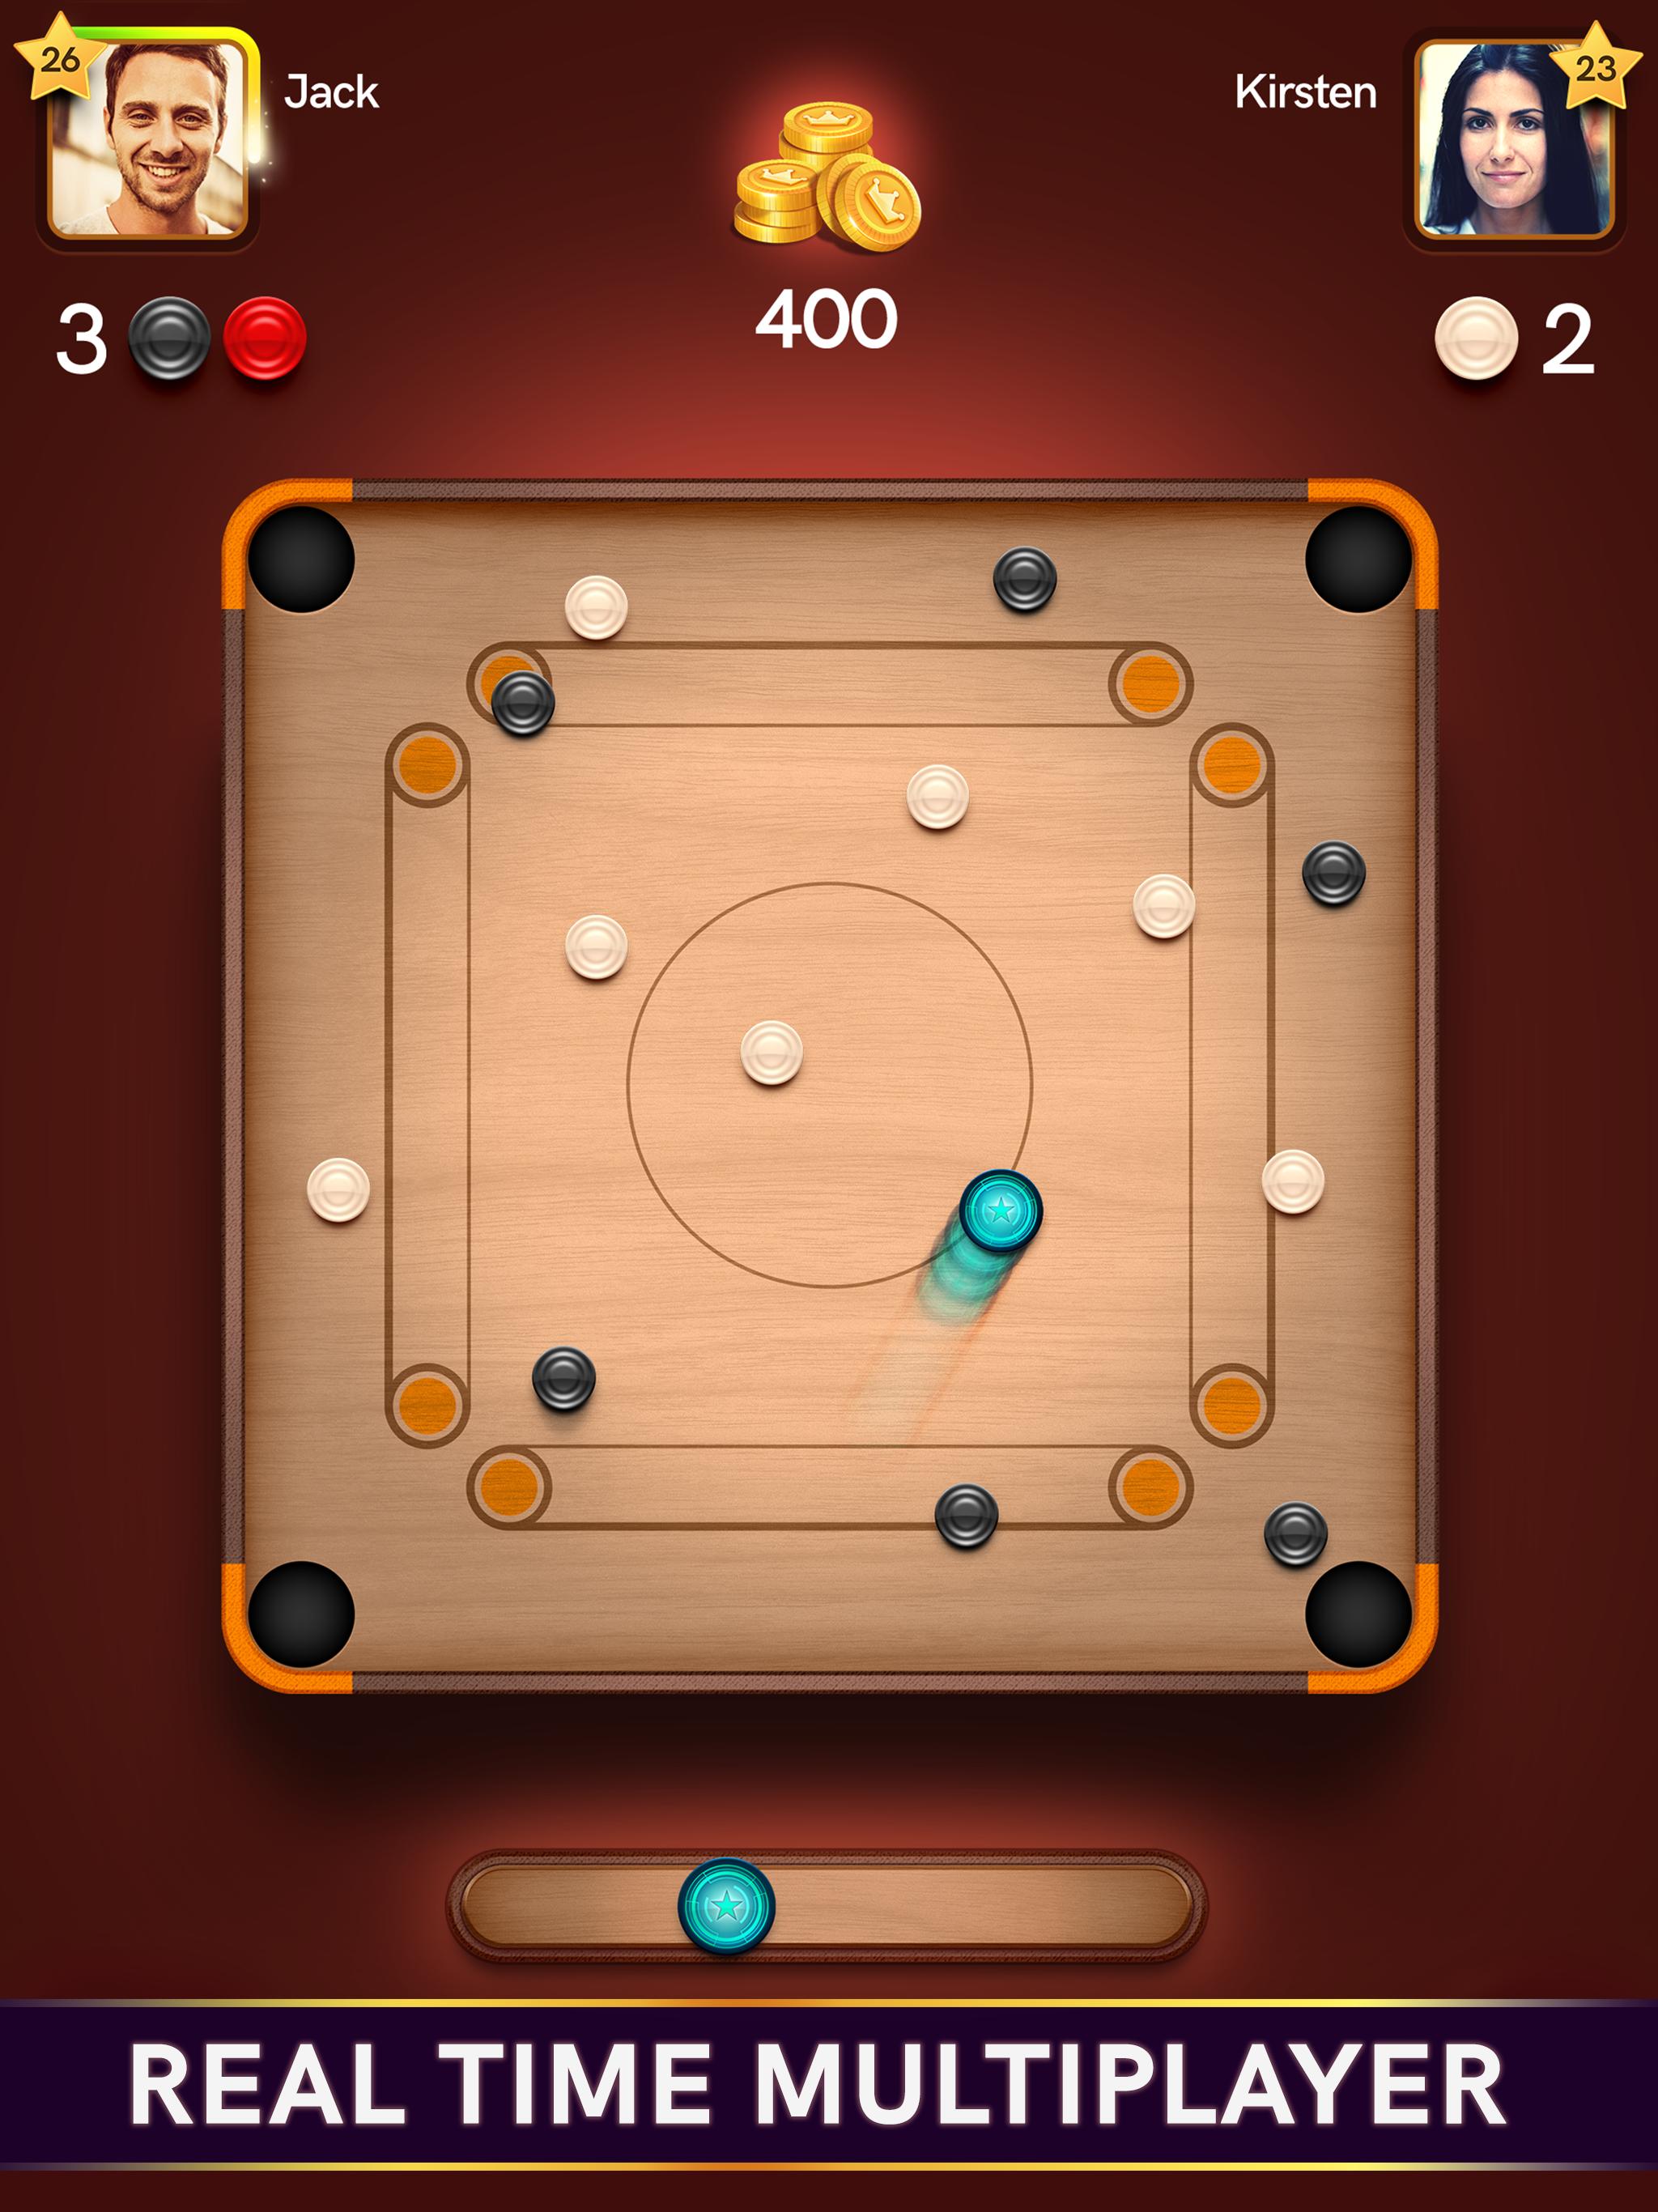 Carrom Disc Pool for Android - APK Download - 